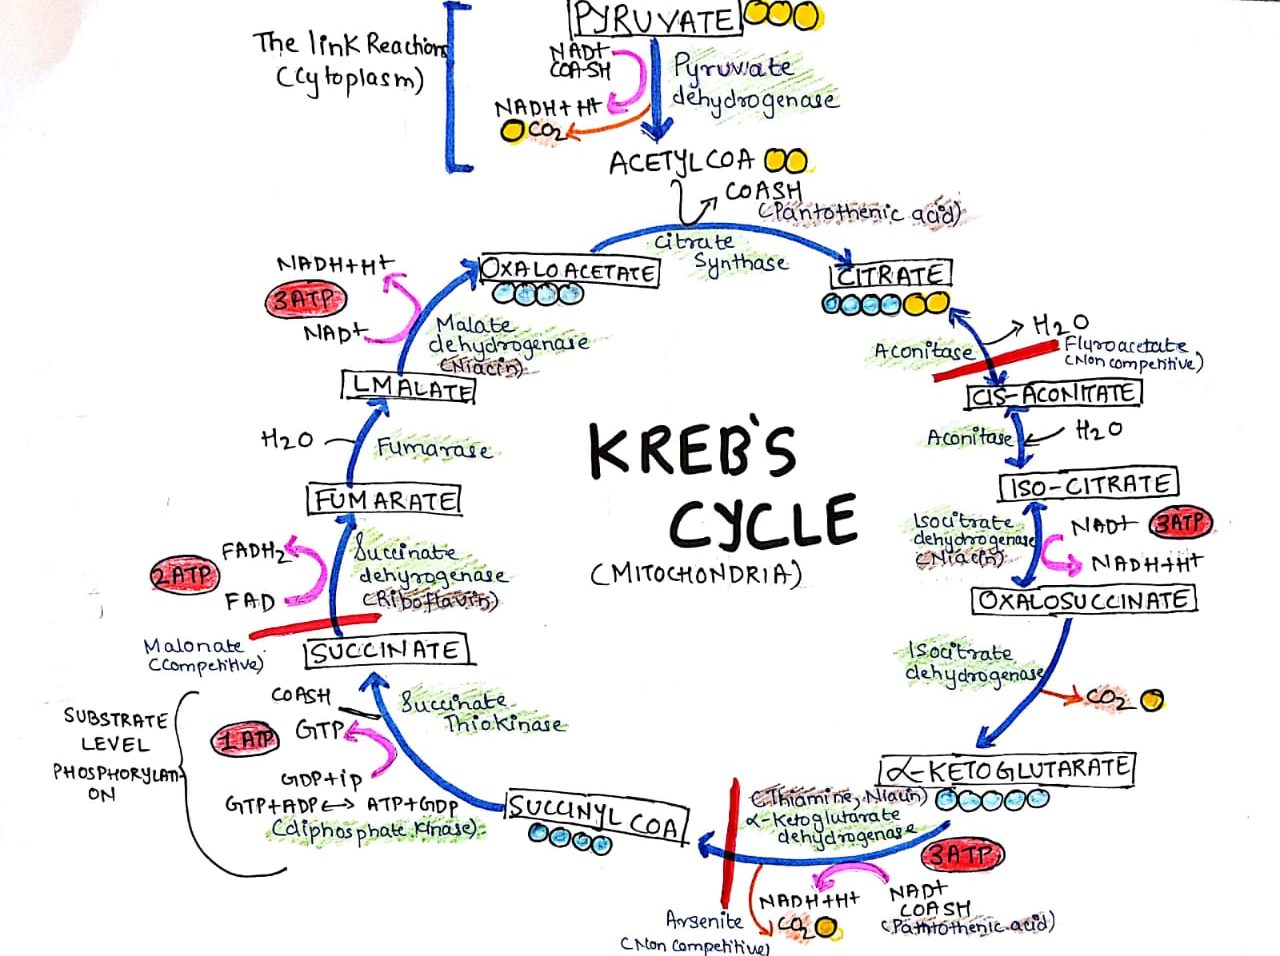 Tricarboxylic acid cycle (Kreb’s Cycle)